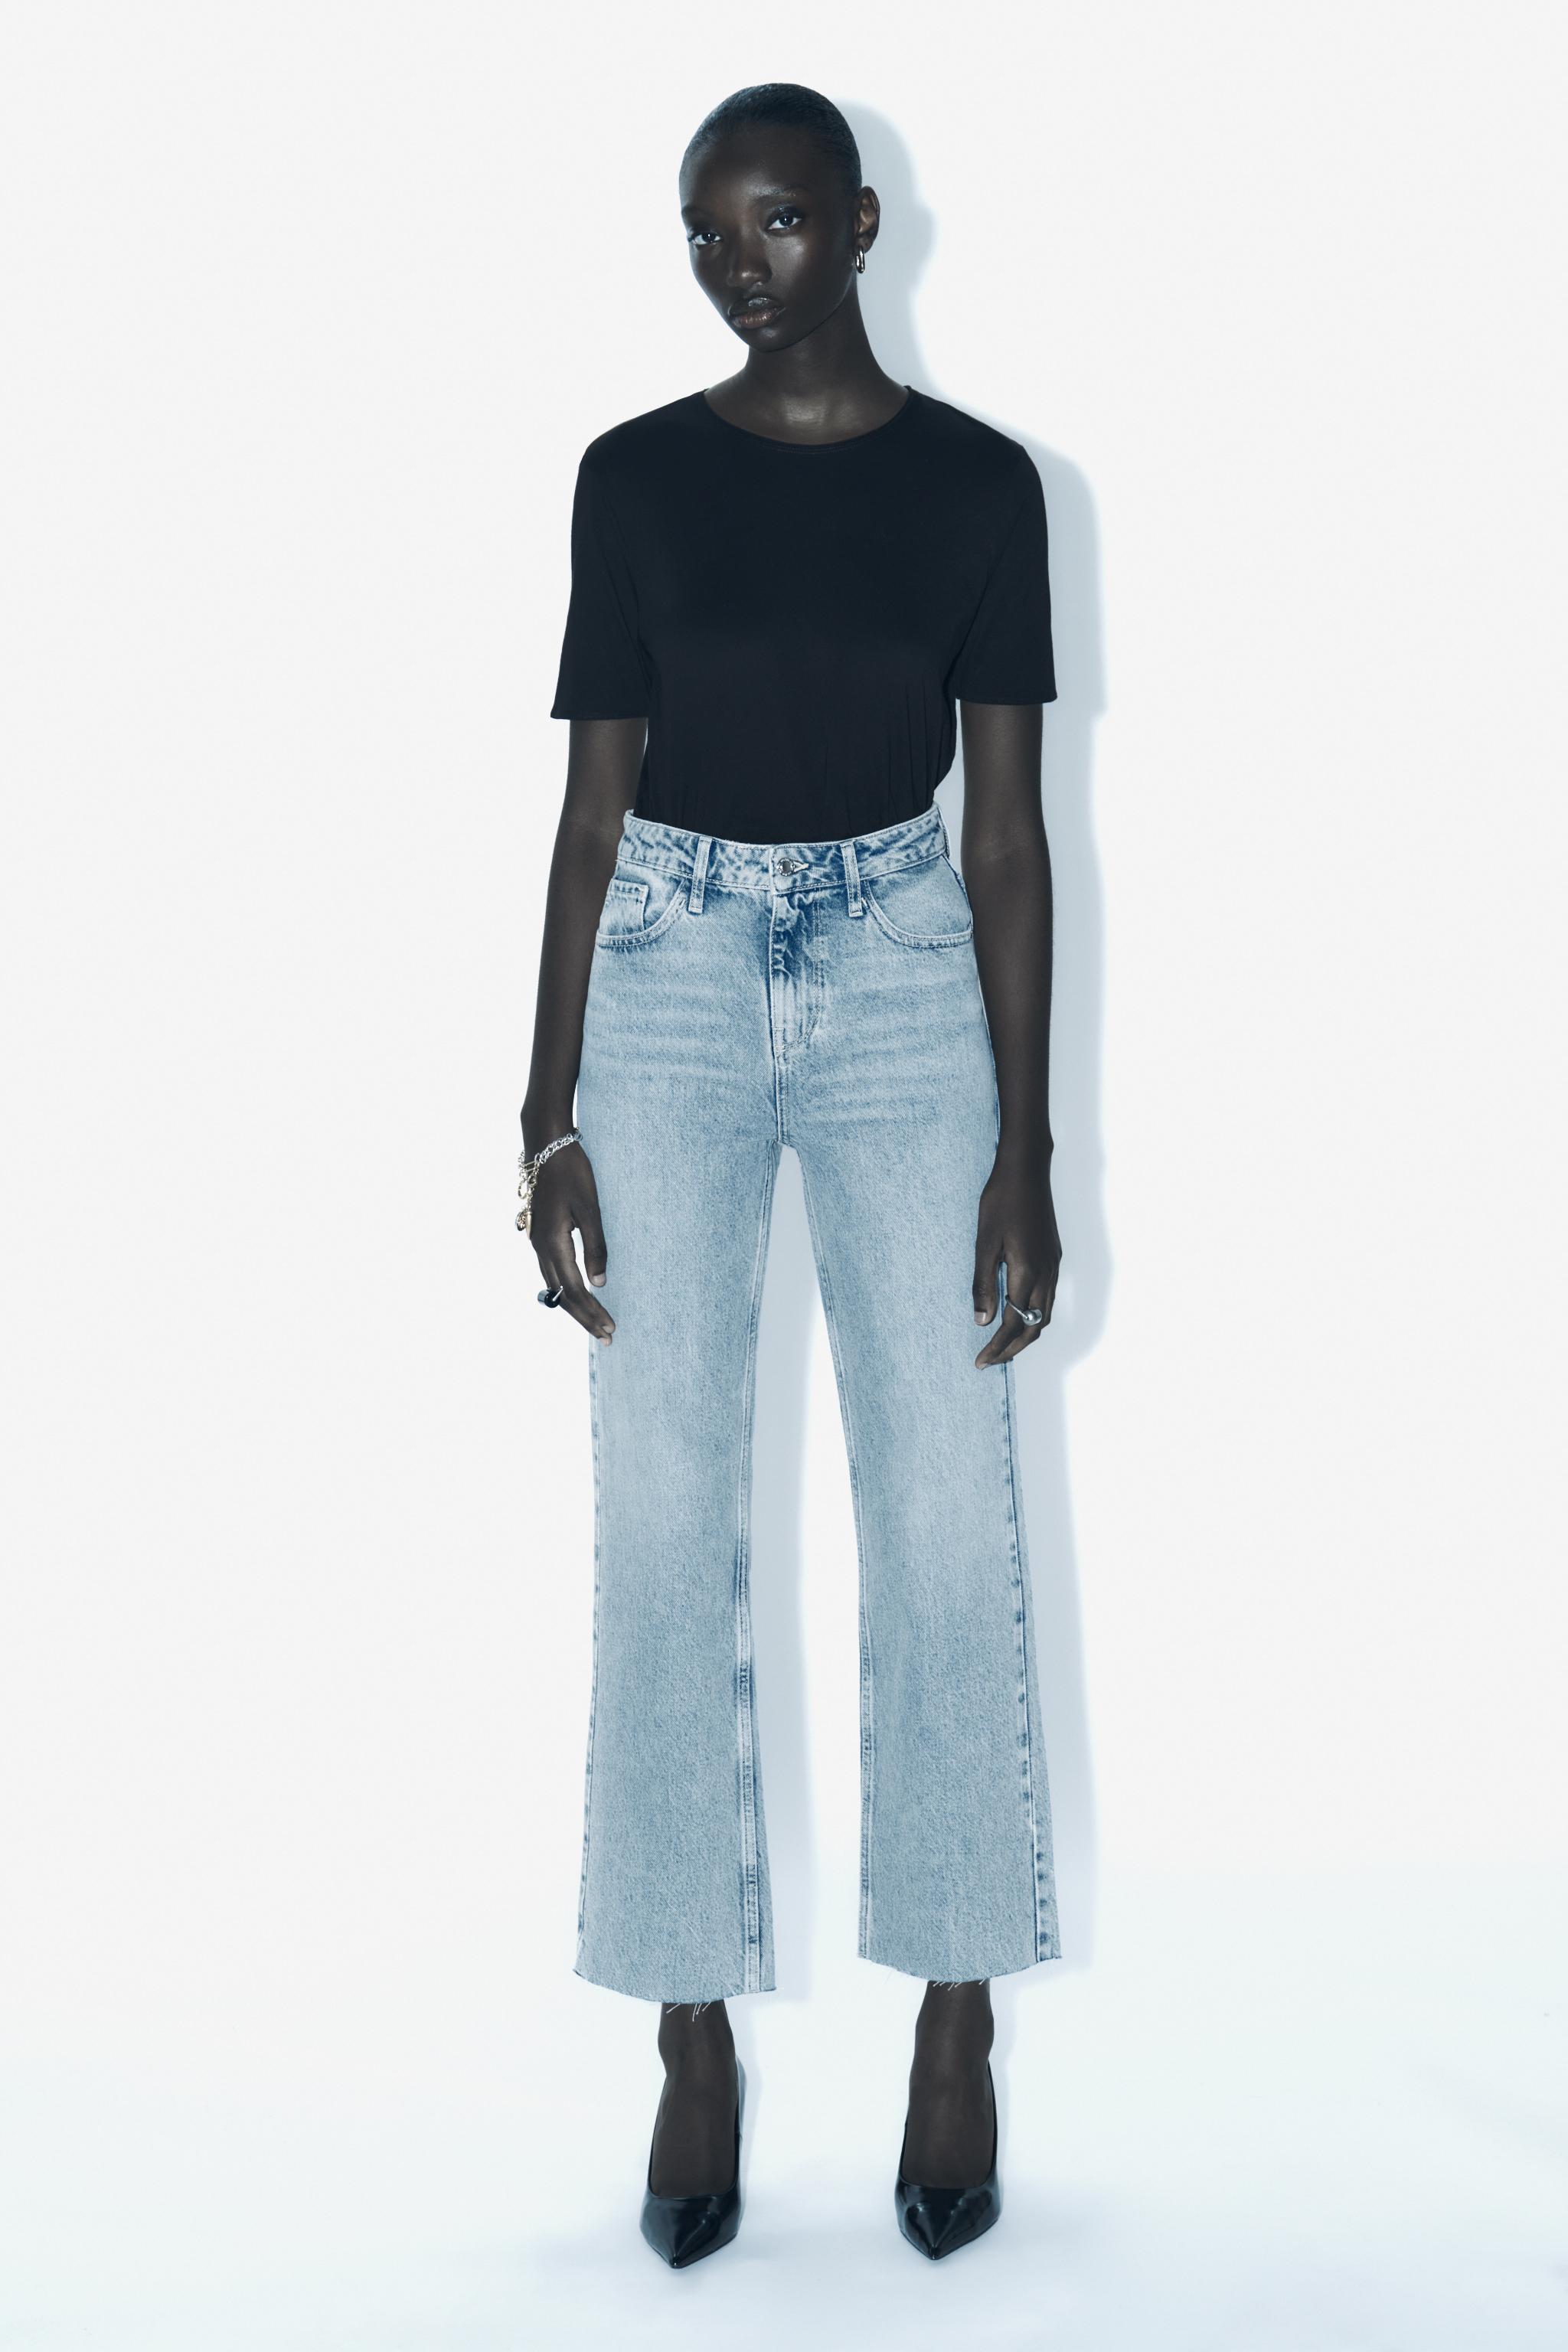 ✨ ▫️Z1975 straight cut pearl JEANS w/a high waist 🏷️6164/227 💶39.95 €, 💵65.90 C$ *saved in highlights “Fall links